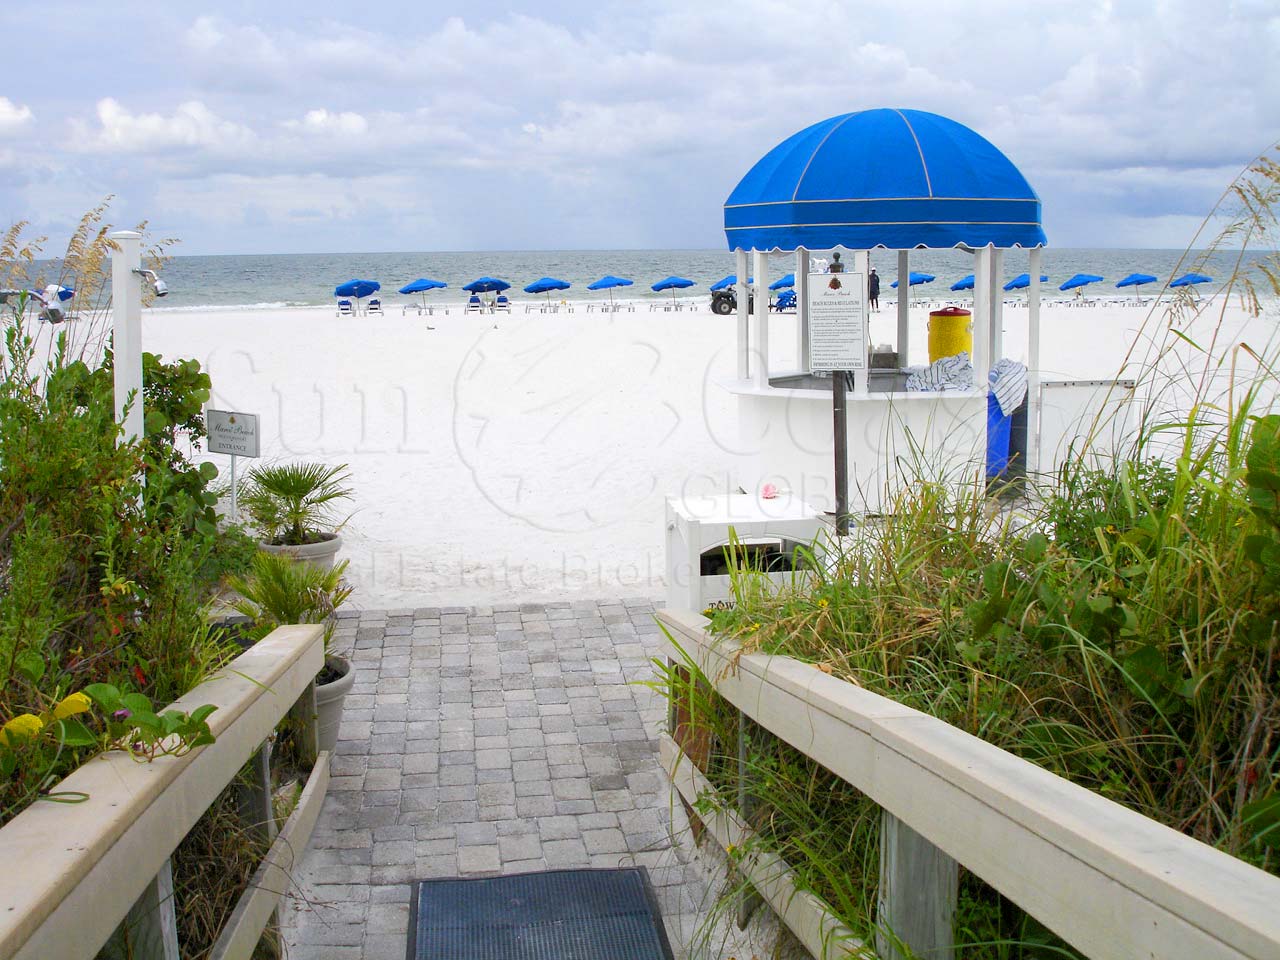 FIDDLERS CREEK Tarpon Club includes beach amenities at the Marco Beach Ocean Resort. Entrance from the walkway to the beach.